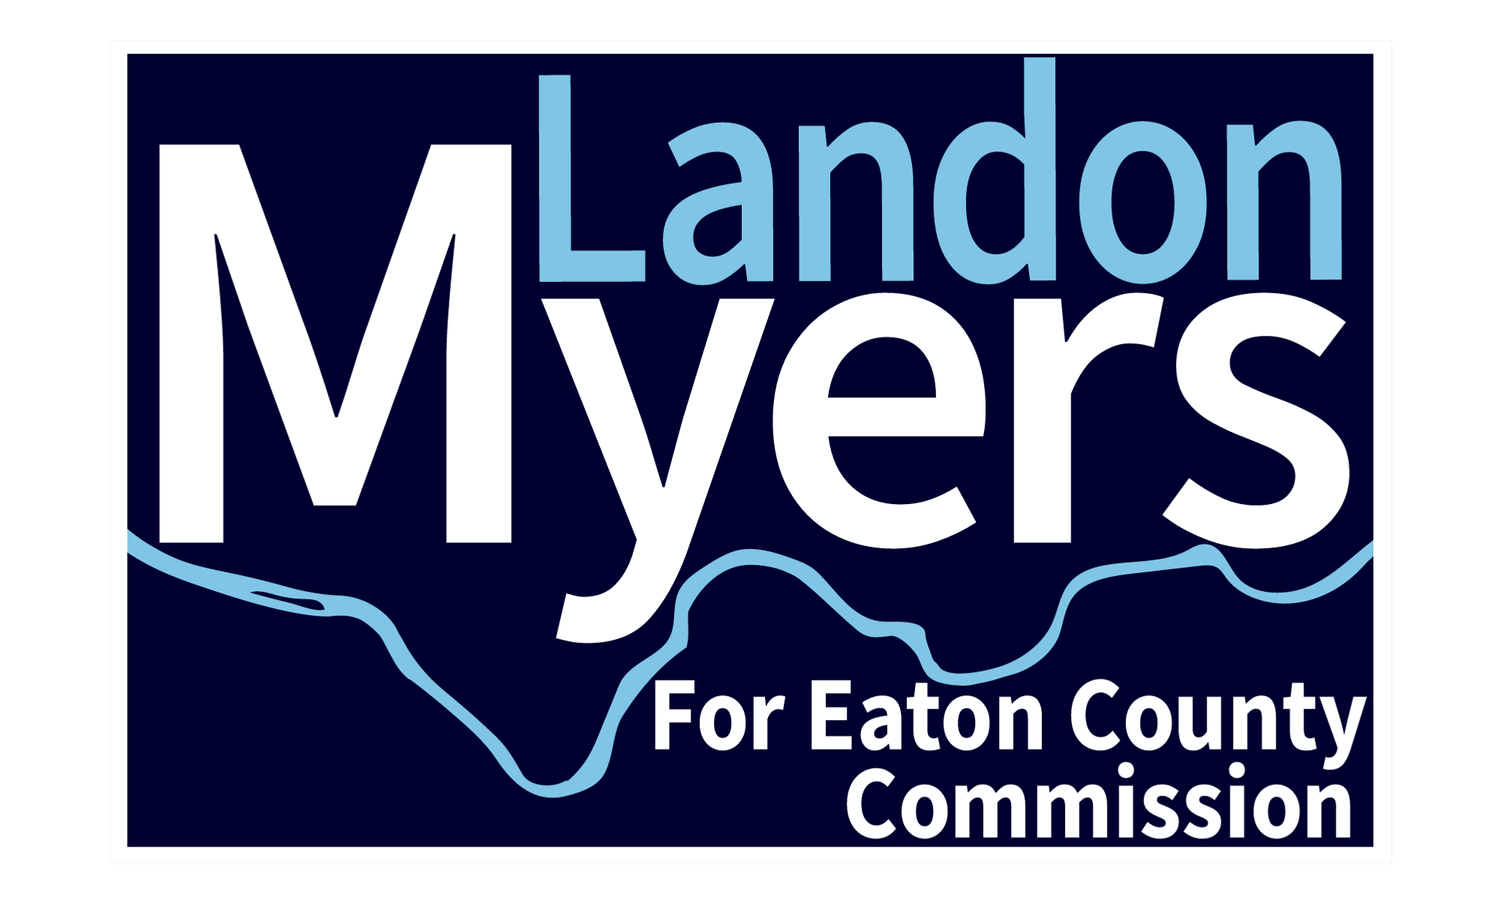 Landon Myers for Eaton County Commission